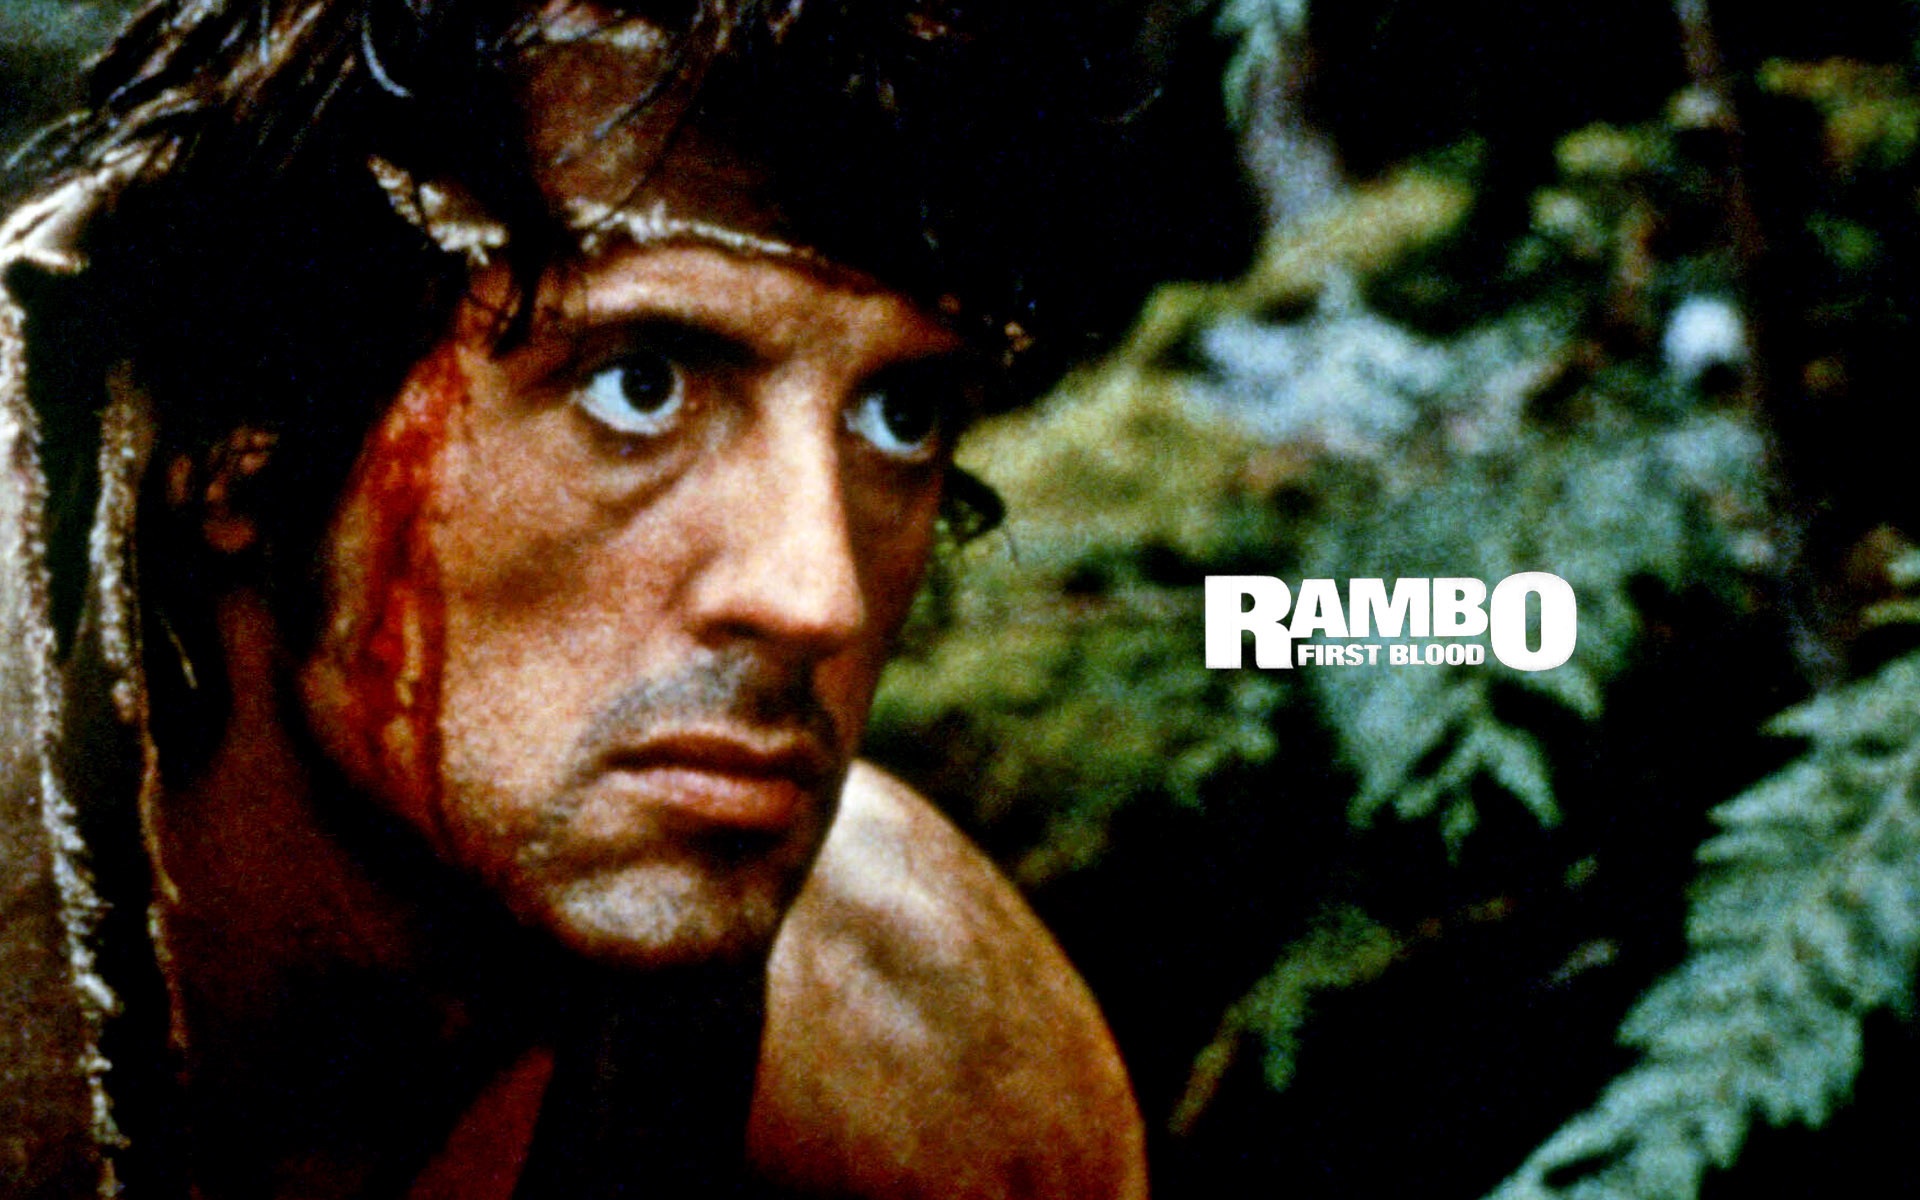 Rambo First Blood Blu-ray Steelbook will be a Zavvi Exclusive in the UK